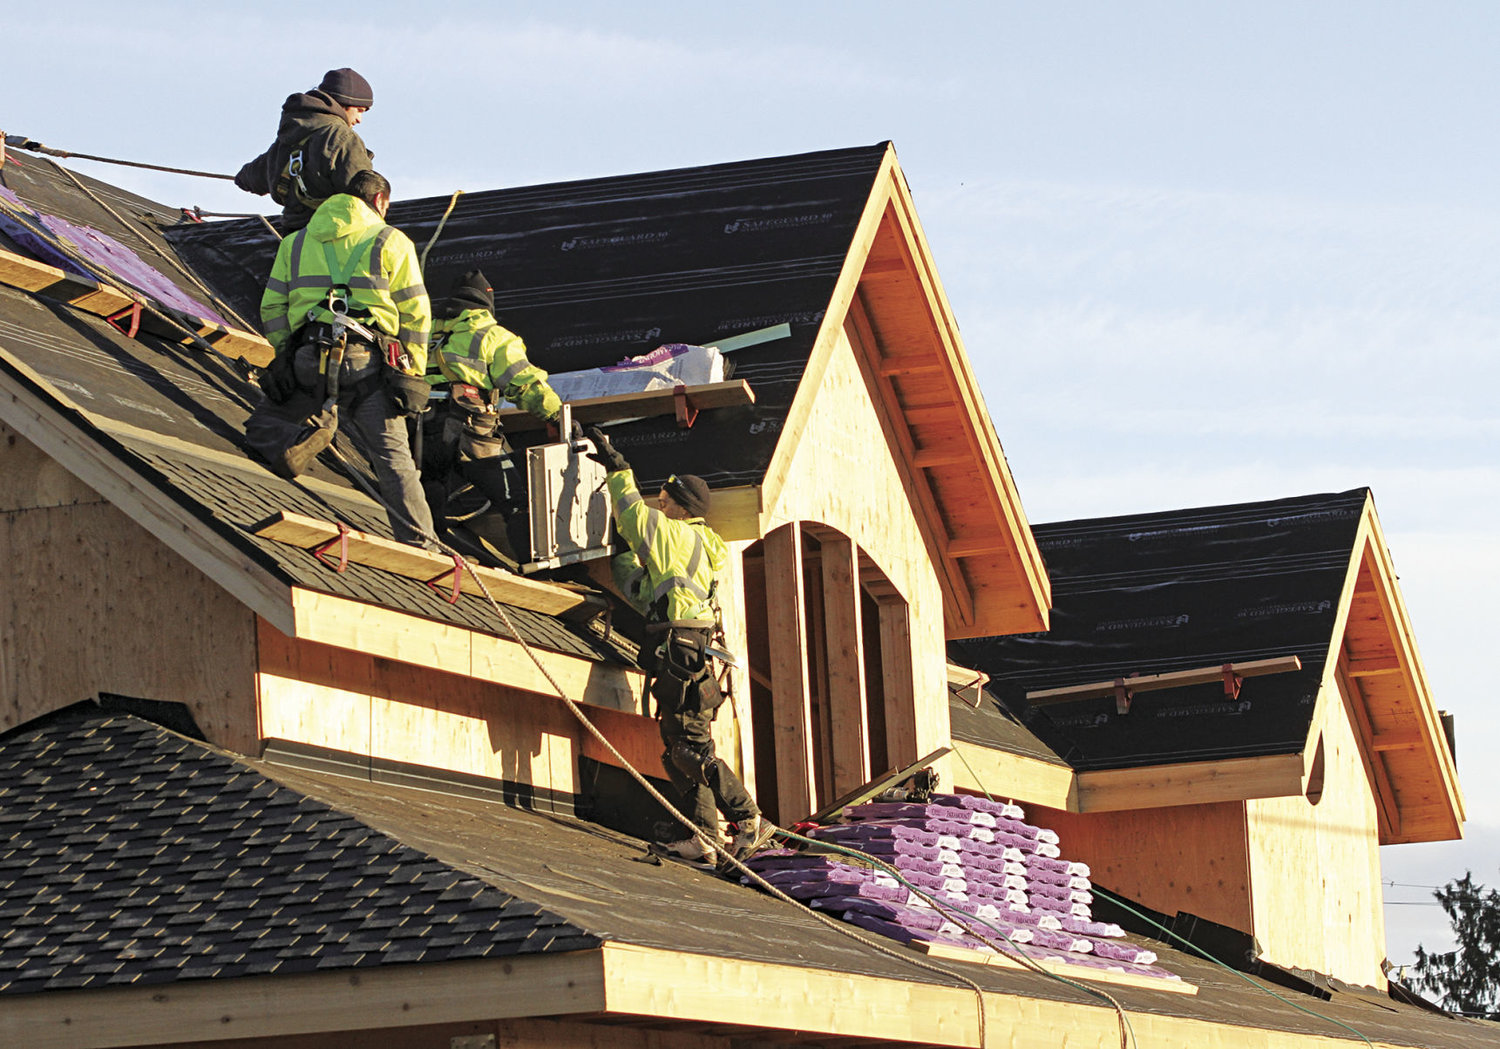 A crew from All Weather Roofing works on a home under construction in uptown Port Townsend. Housing projects picked up considerably in 2016, and the City of Port Townsend is gearing up for a substantial increase in permits and planning for housing projects, big and small, in 2017 and 2018. Photo by Patrick Sullivan